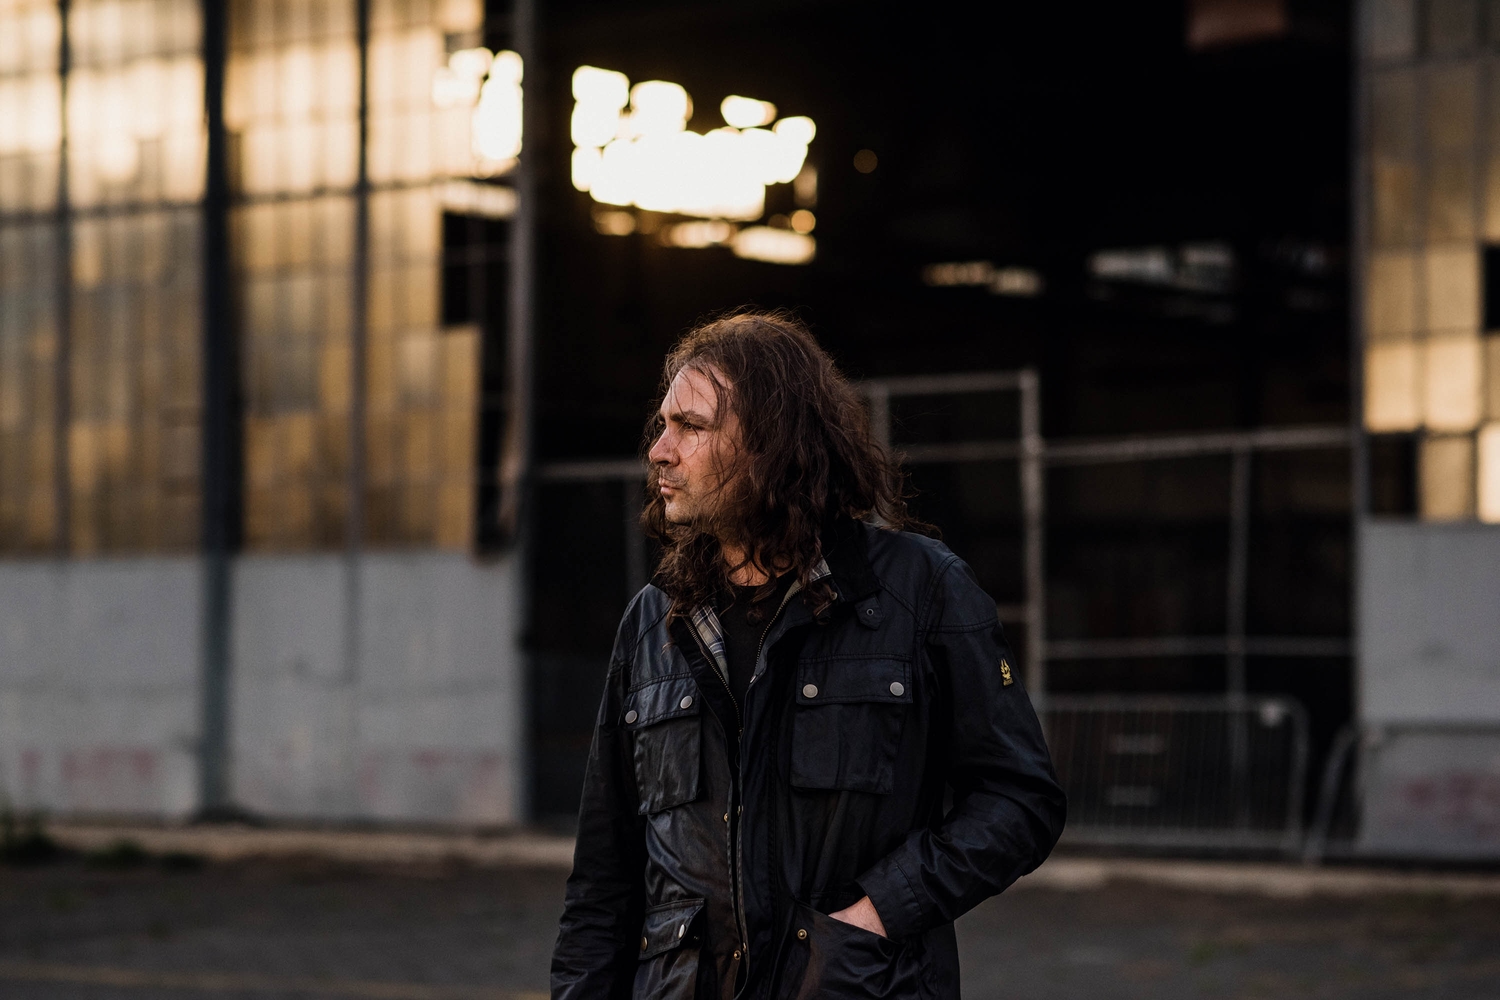 The War On Drugs post ‘Pain’, from upcoming album, ‘A Deeper Understanding’